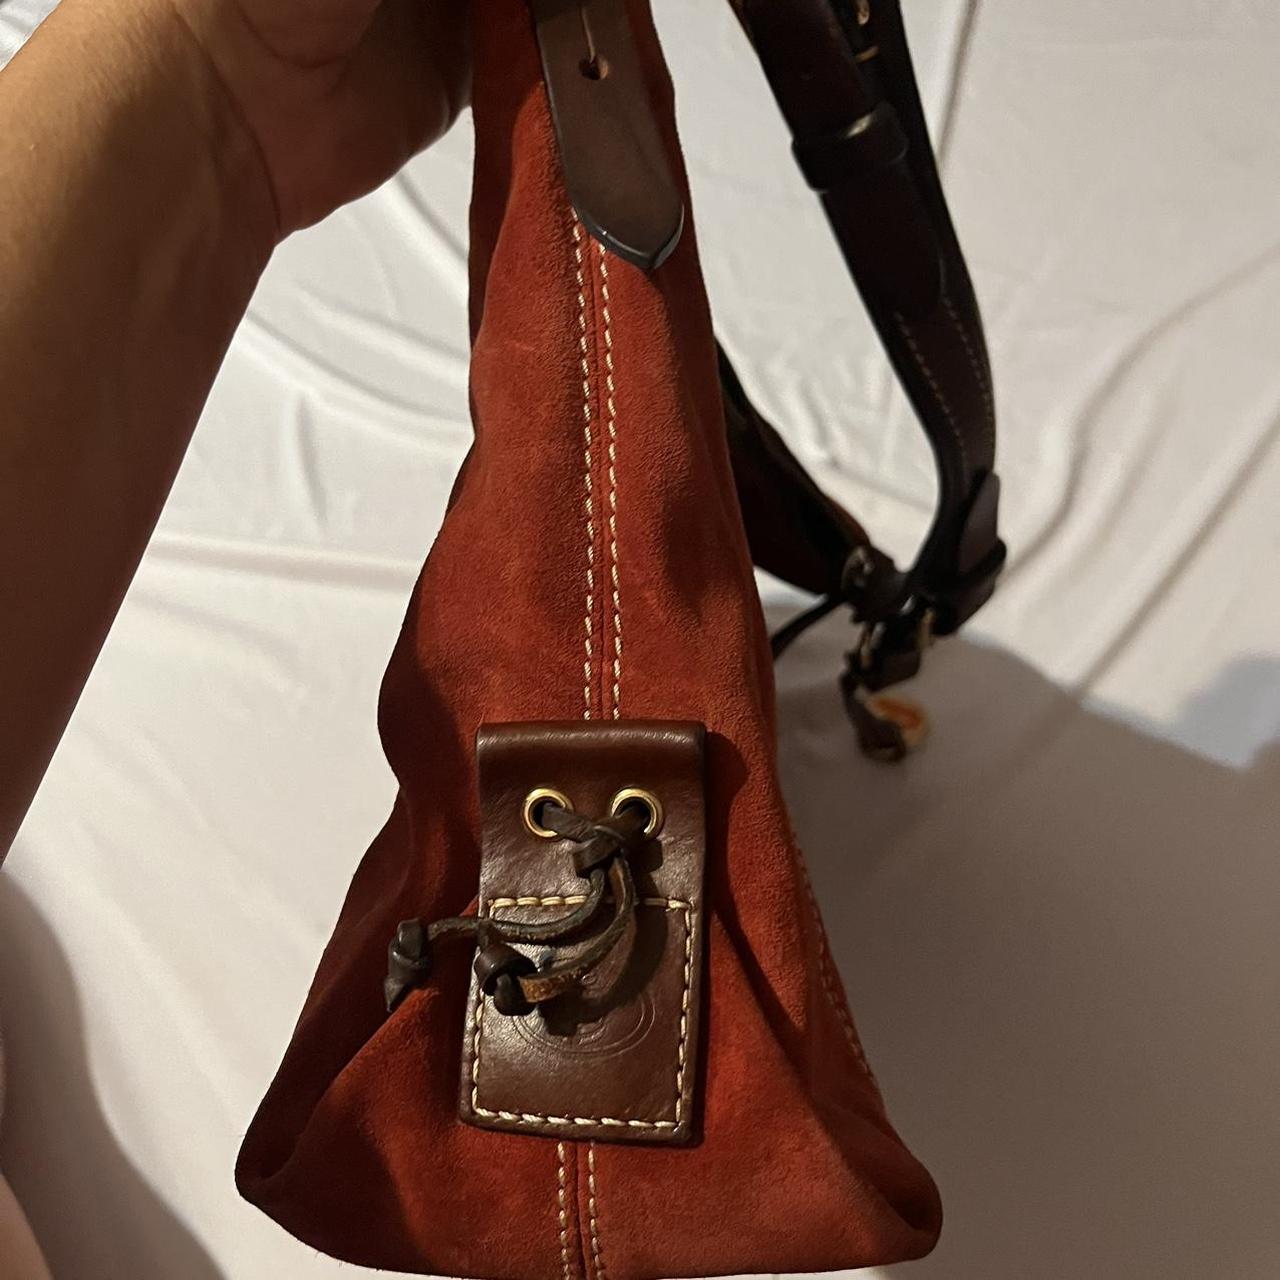 Suede Dooney Bourke Bag(purse) - clothing & accessories - by owner